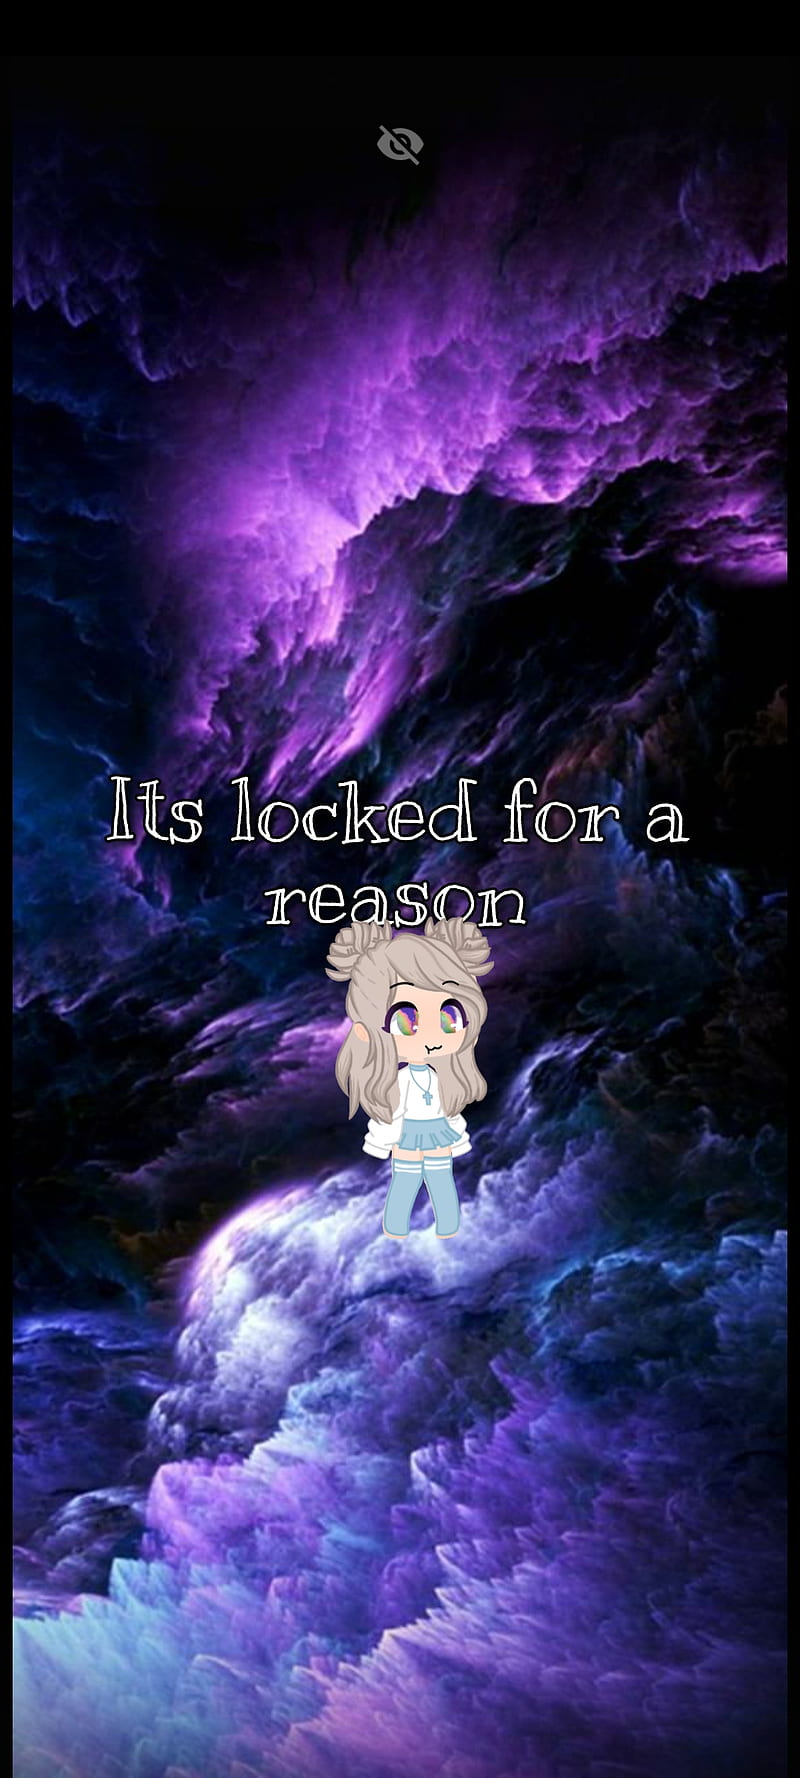 Lock for a reason wallpaper by VanessaXp3  Download on ZEDGE  7d38